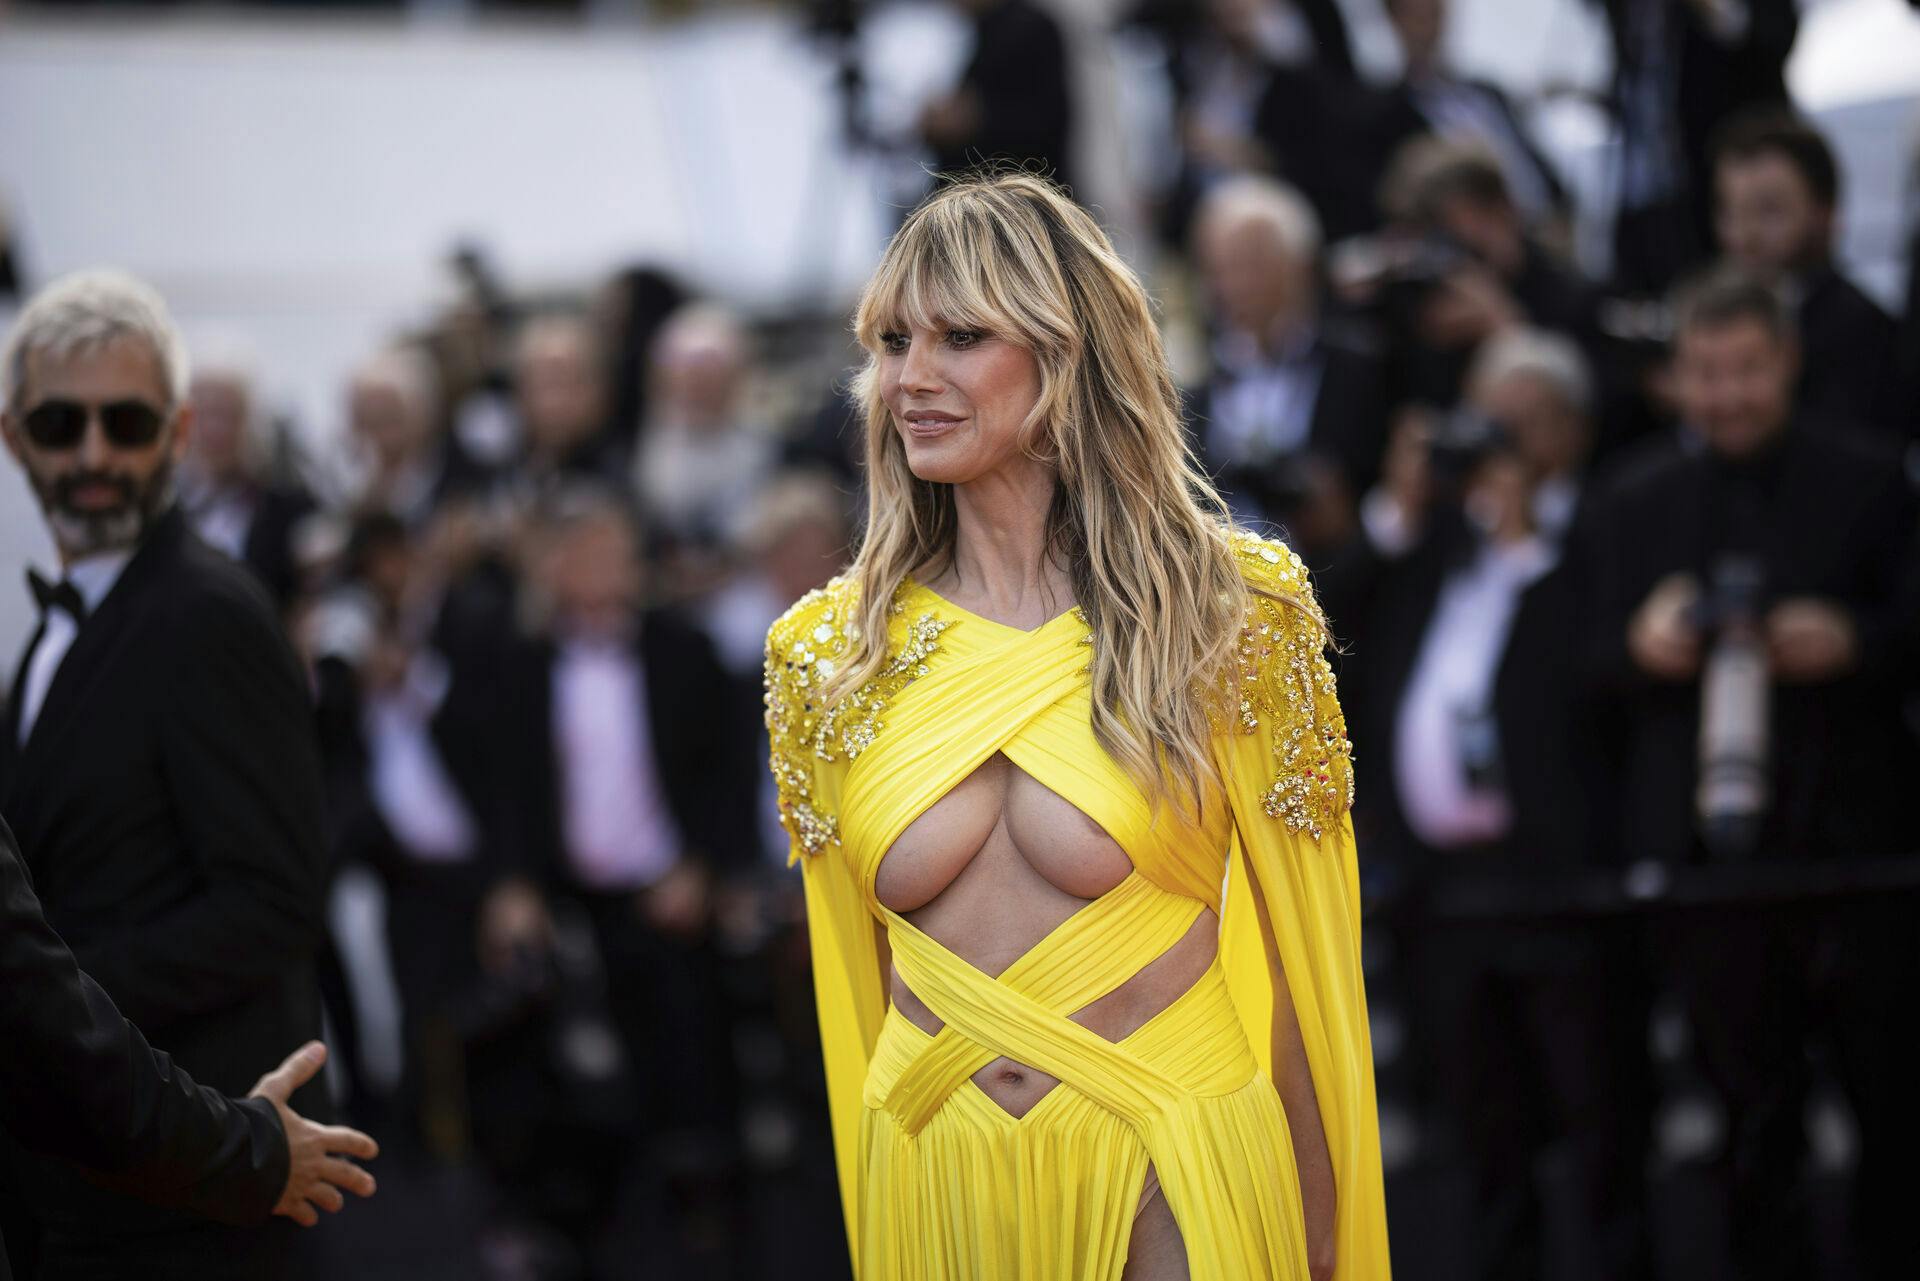 Heidi Klum poses for photographers upon arrival at the premiere of the film 'The Pot-au-Feu' at the 76th international film festival, Cannes, southern France, Wednesday, May 24, 2023. (Photo by Vianney Le Caer/Invision/AP)